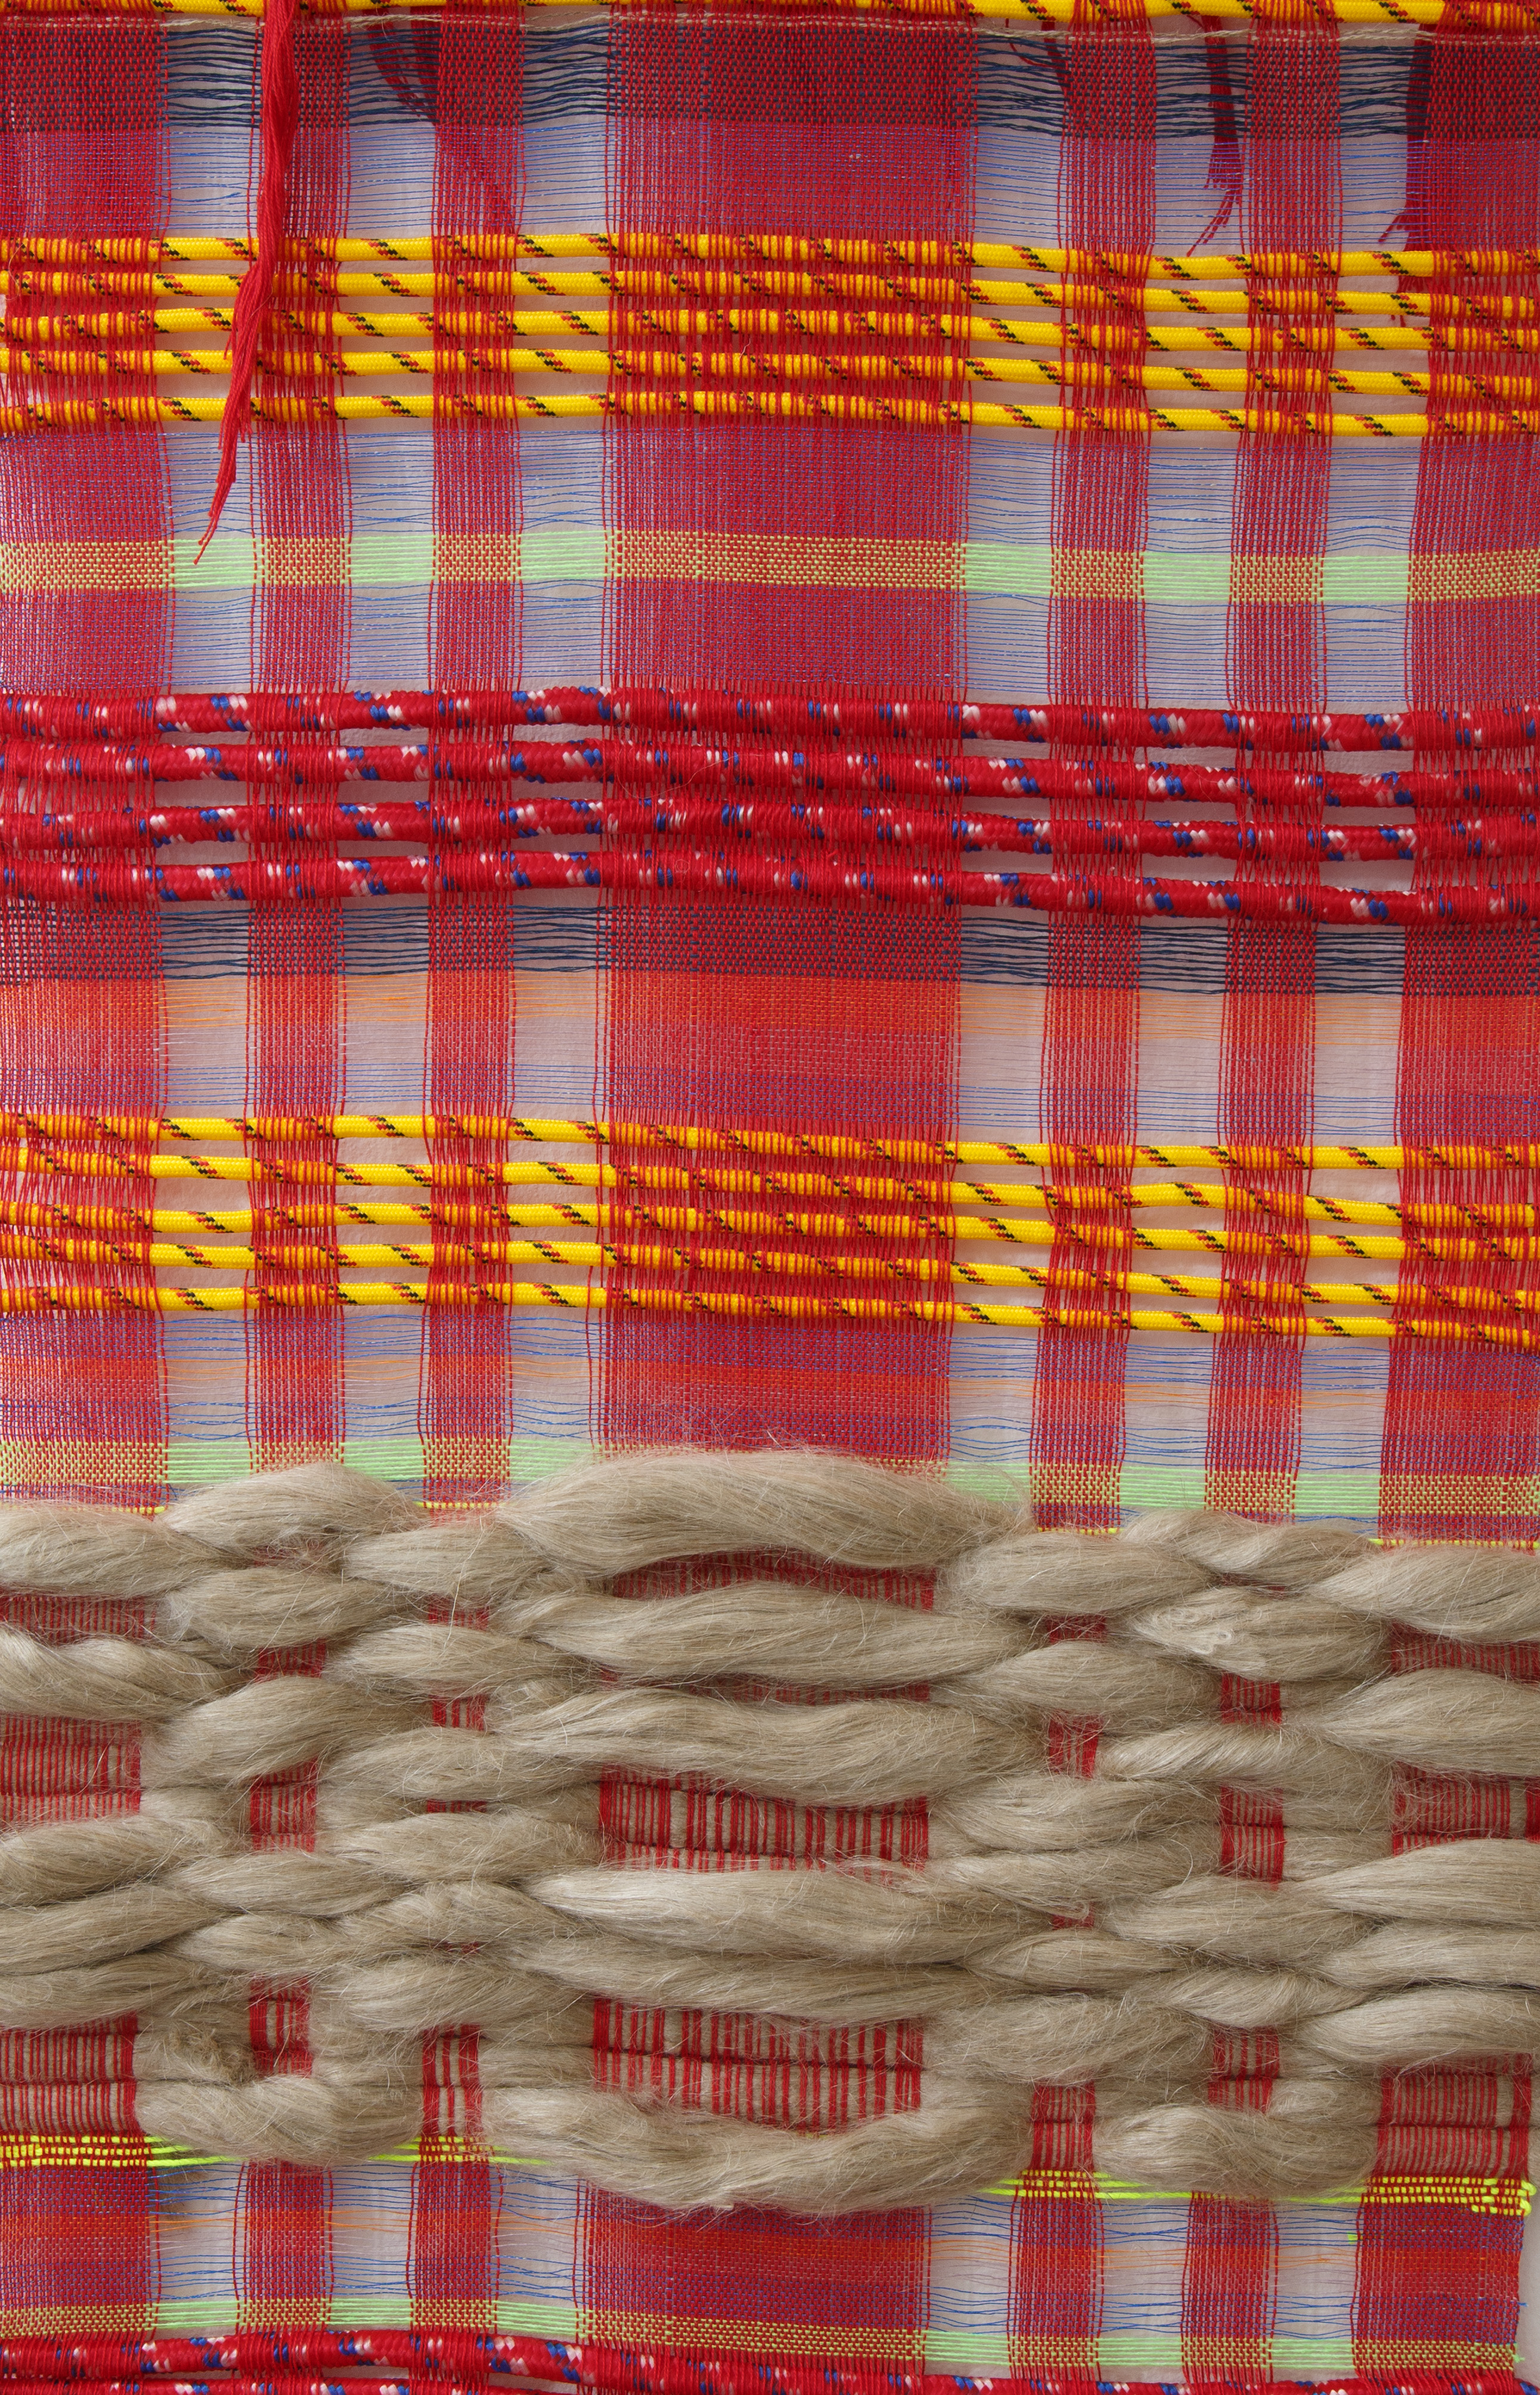 A close-up photograph of a woven artwork by Raisa Kabir titled Untitled I Flax. The top half of the work has a red, check pattern over which is woven yellow unspun flax and red cotton and in the bottom half the linen support is woven with brown industrial rope.